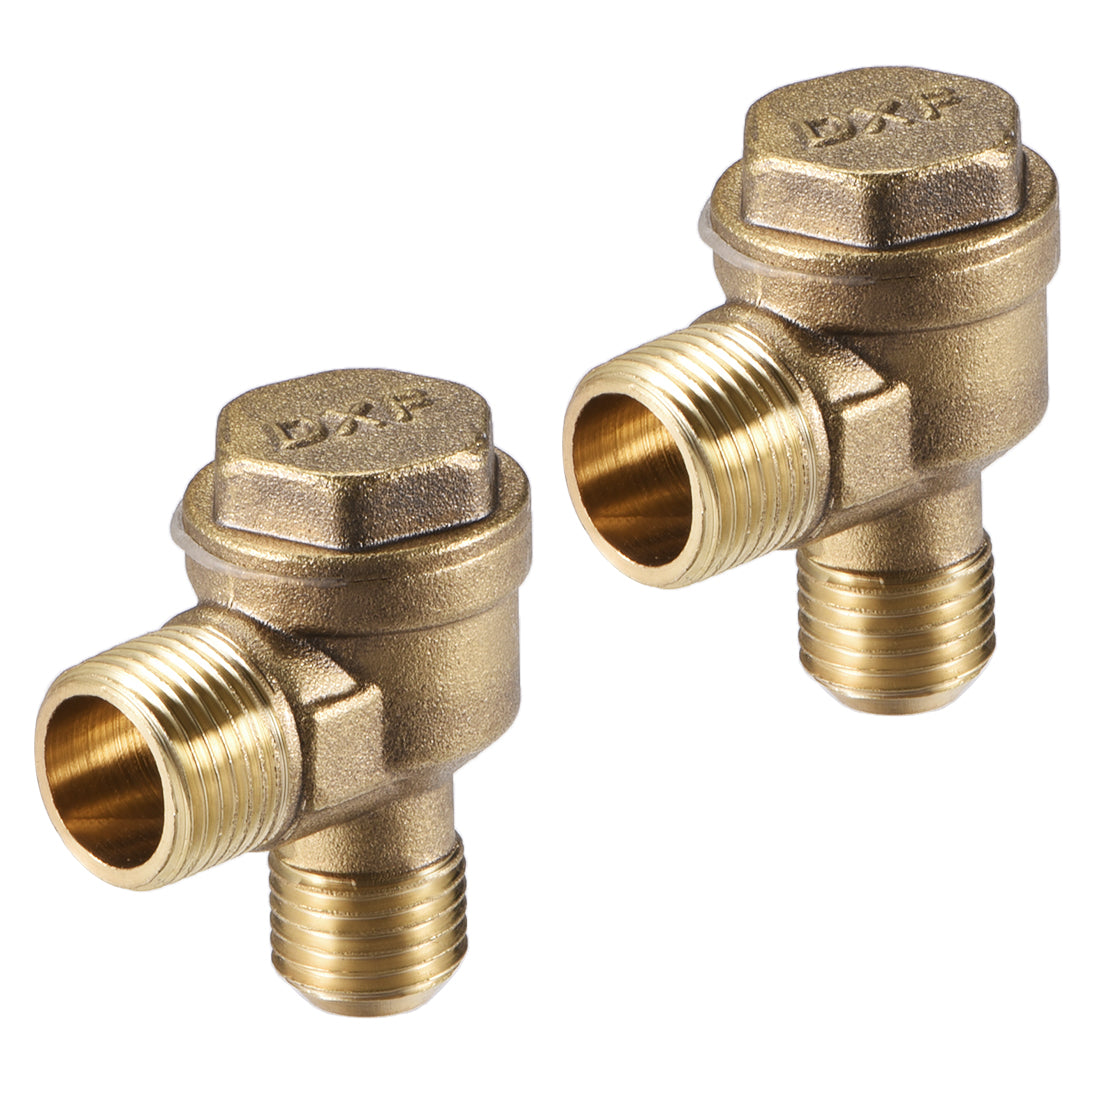 uxcell Uxcell Air Compressor Check Valve 90 Degree Male Threaded Connector PT3/8"xM14*1.5 2Pcs